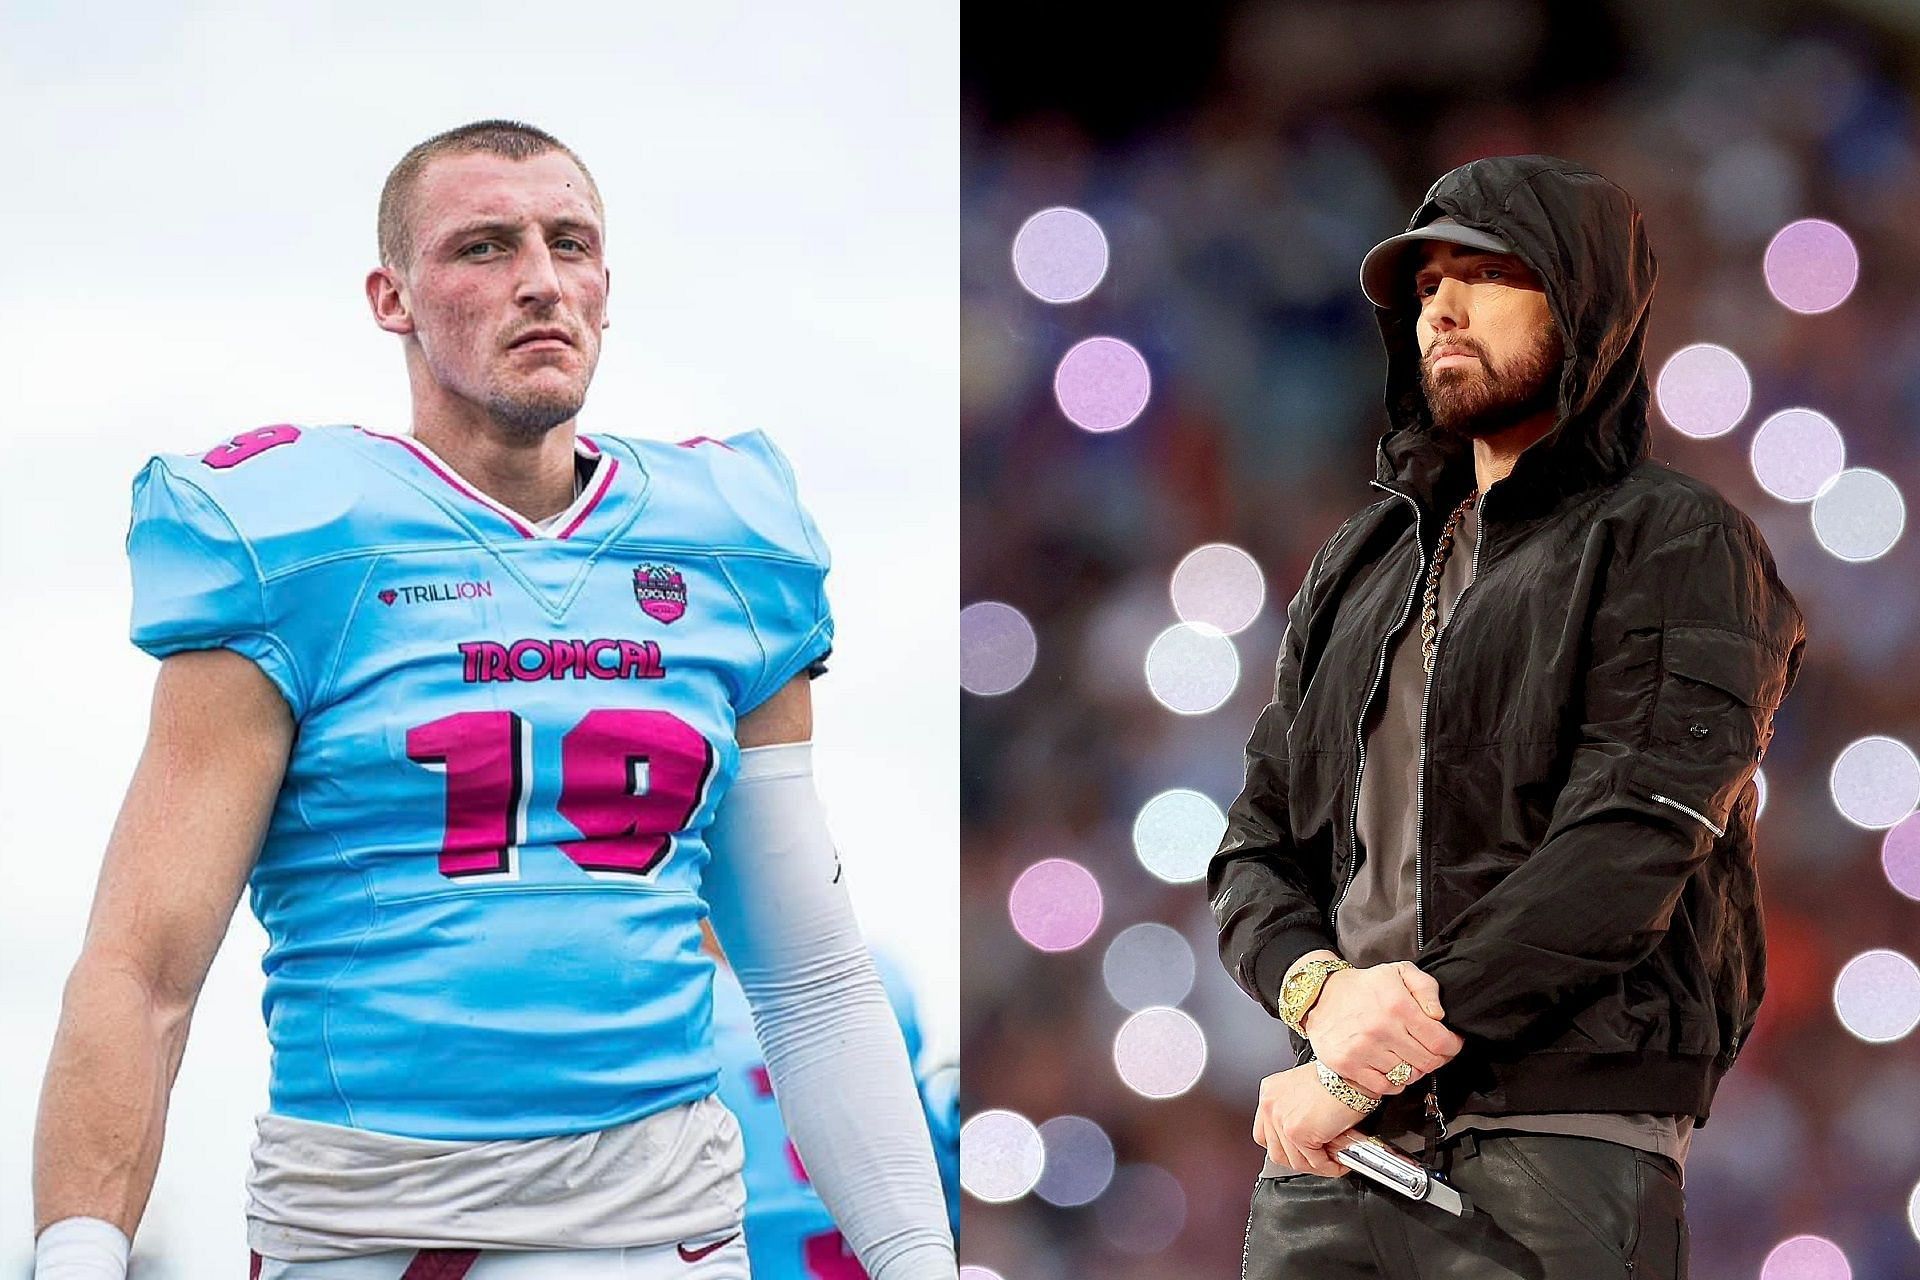 Eminem pays respect to Jerome Kapp after Jets WR goes viral for sensational rap in front of full team (Pic Courtesy: X @JeromeKapp85 and Getty)